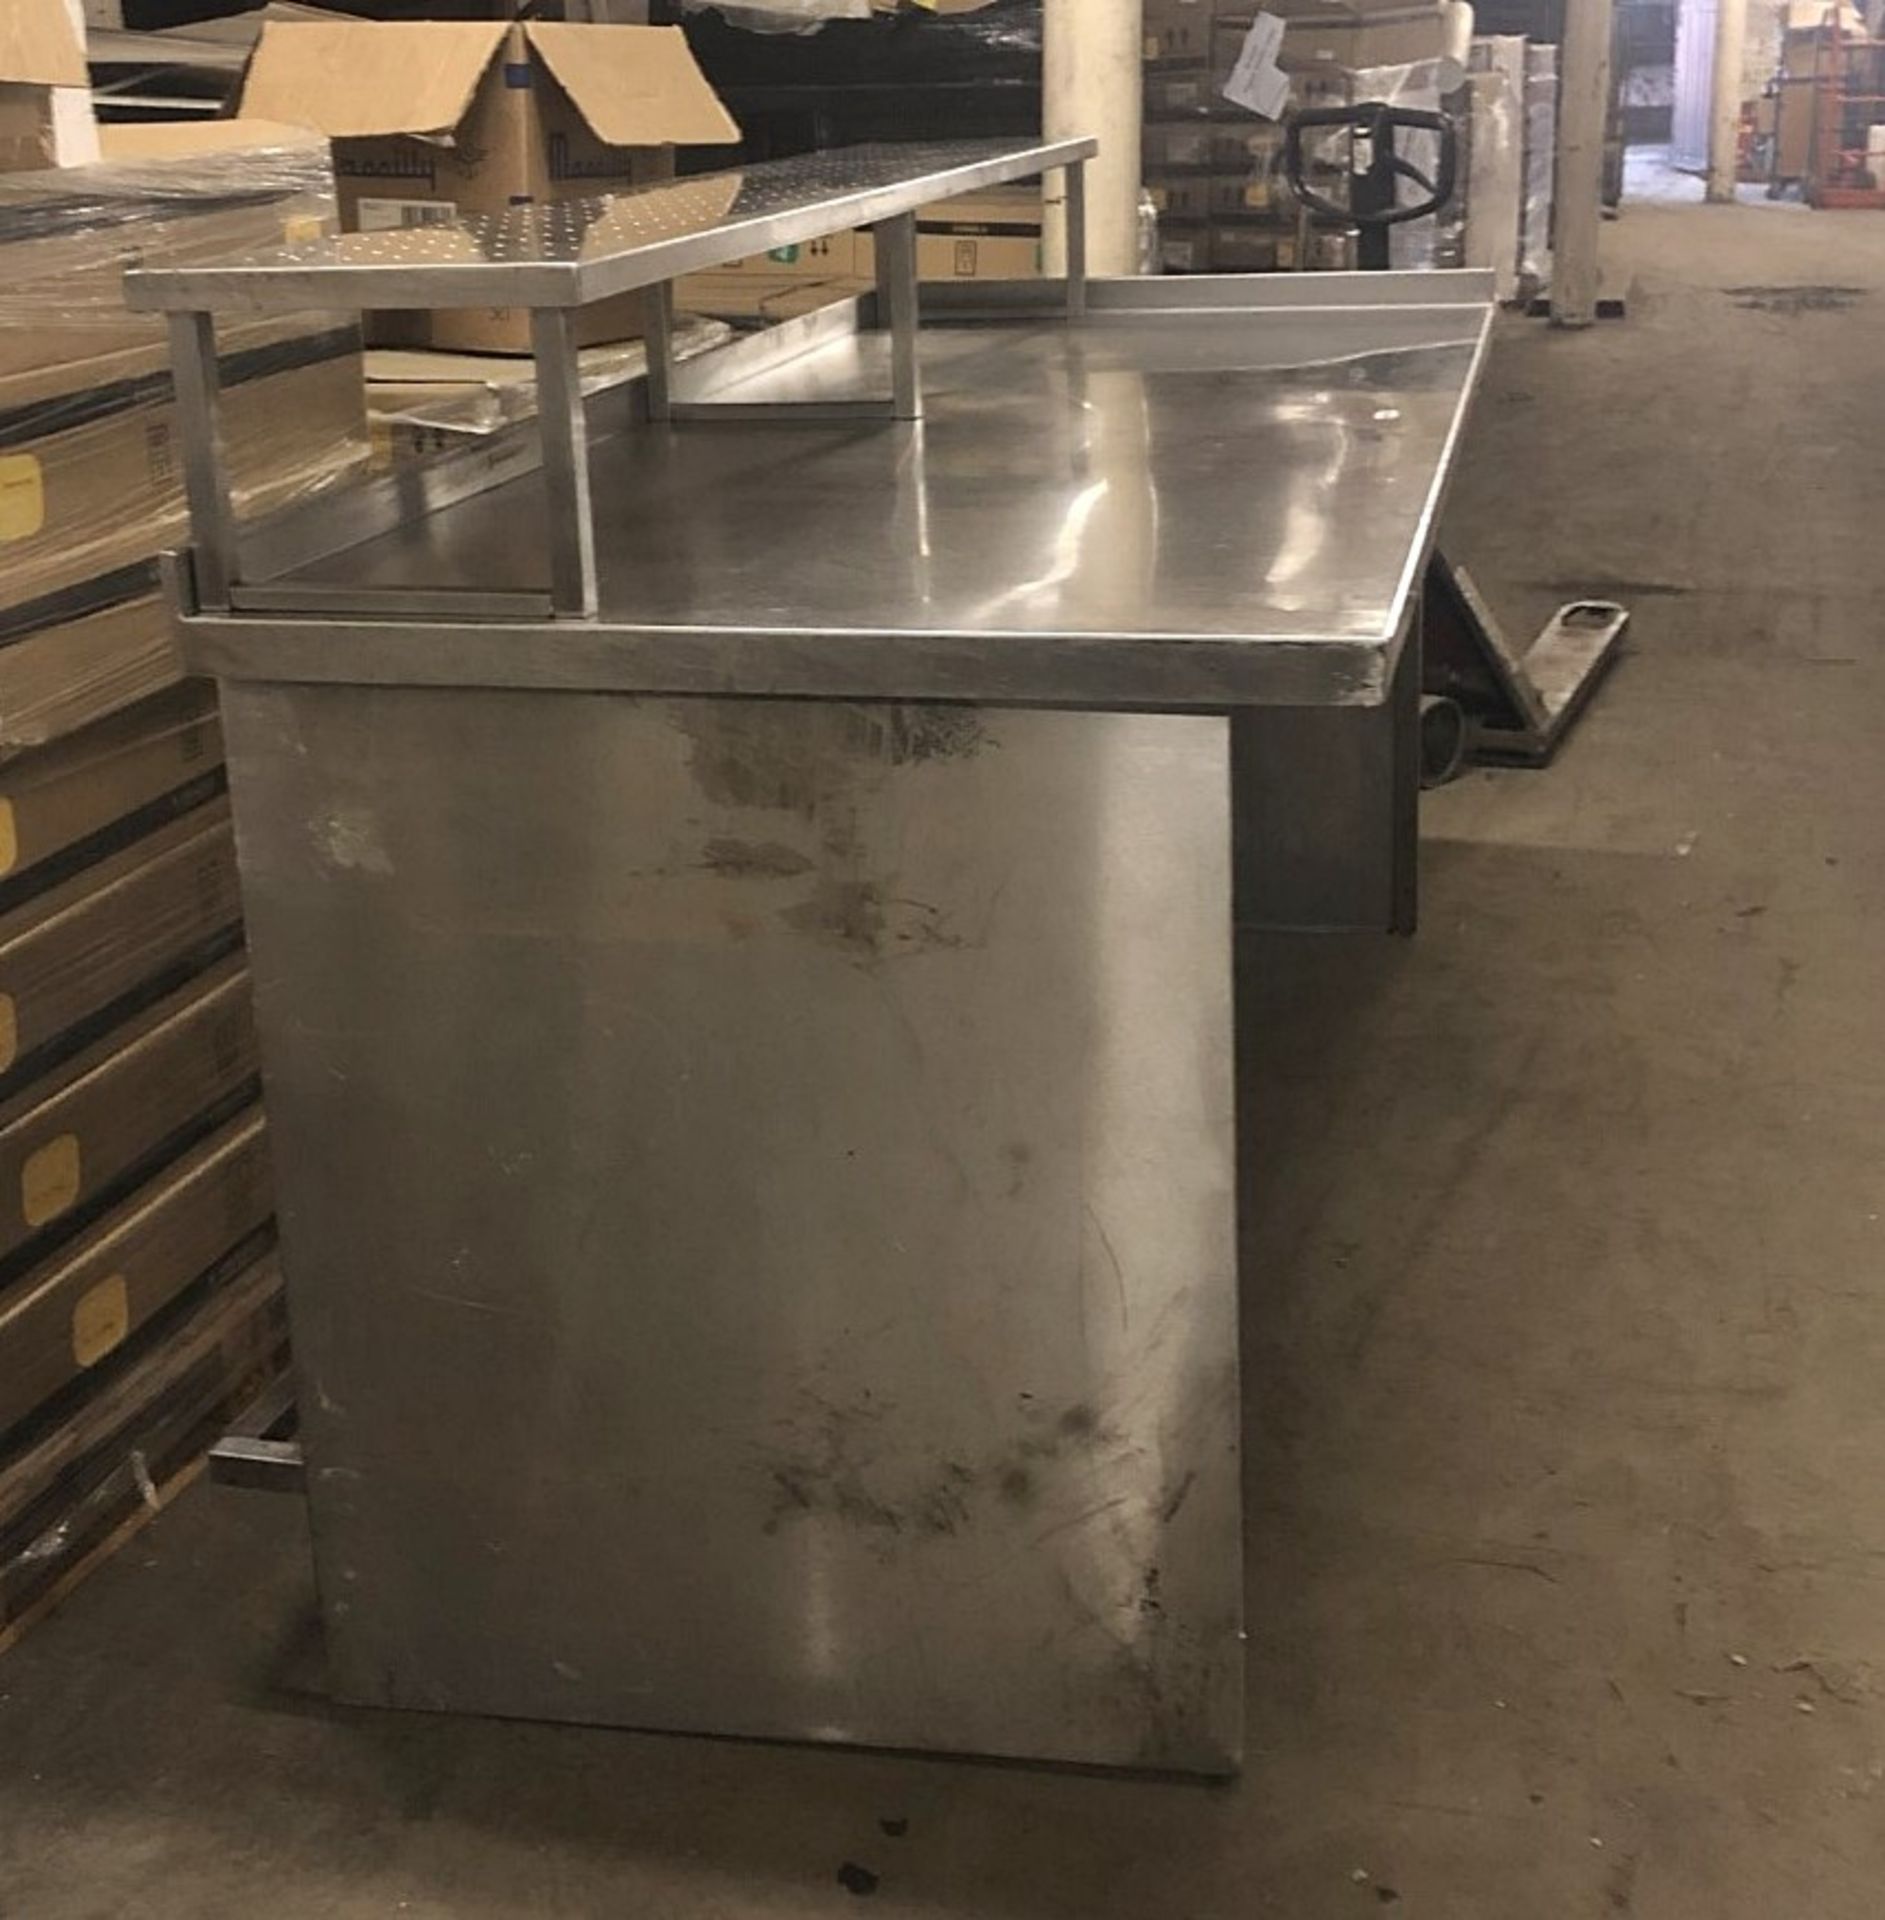 1 x Large Stainless Steel Table Unit - CL374 - NC265 - Location: Bolton BL1 - Image 2 of 6